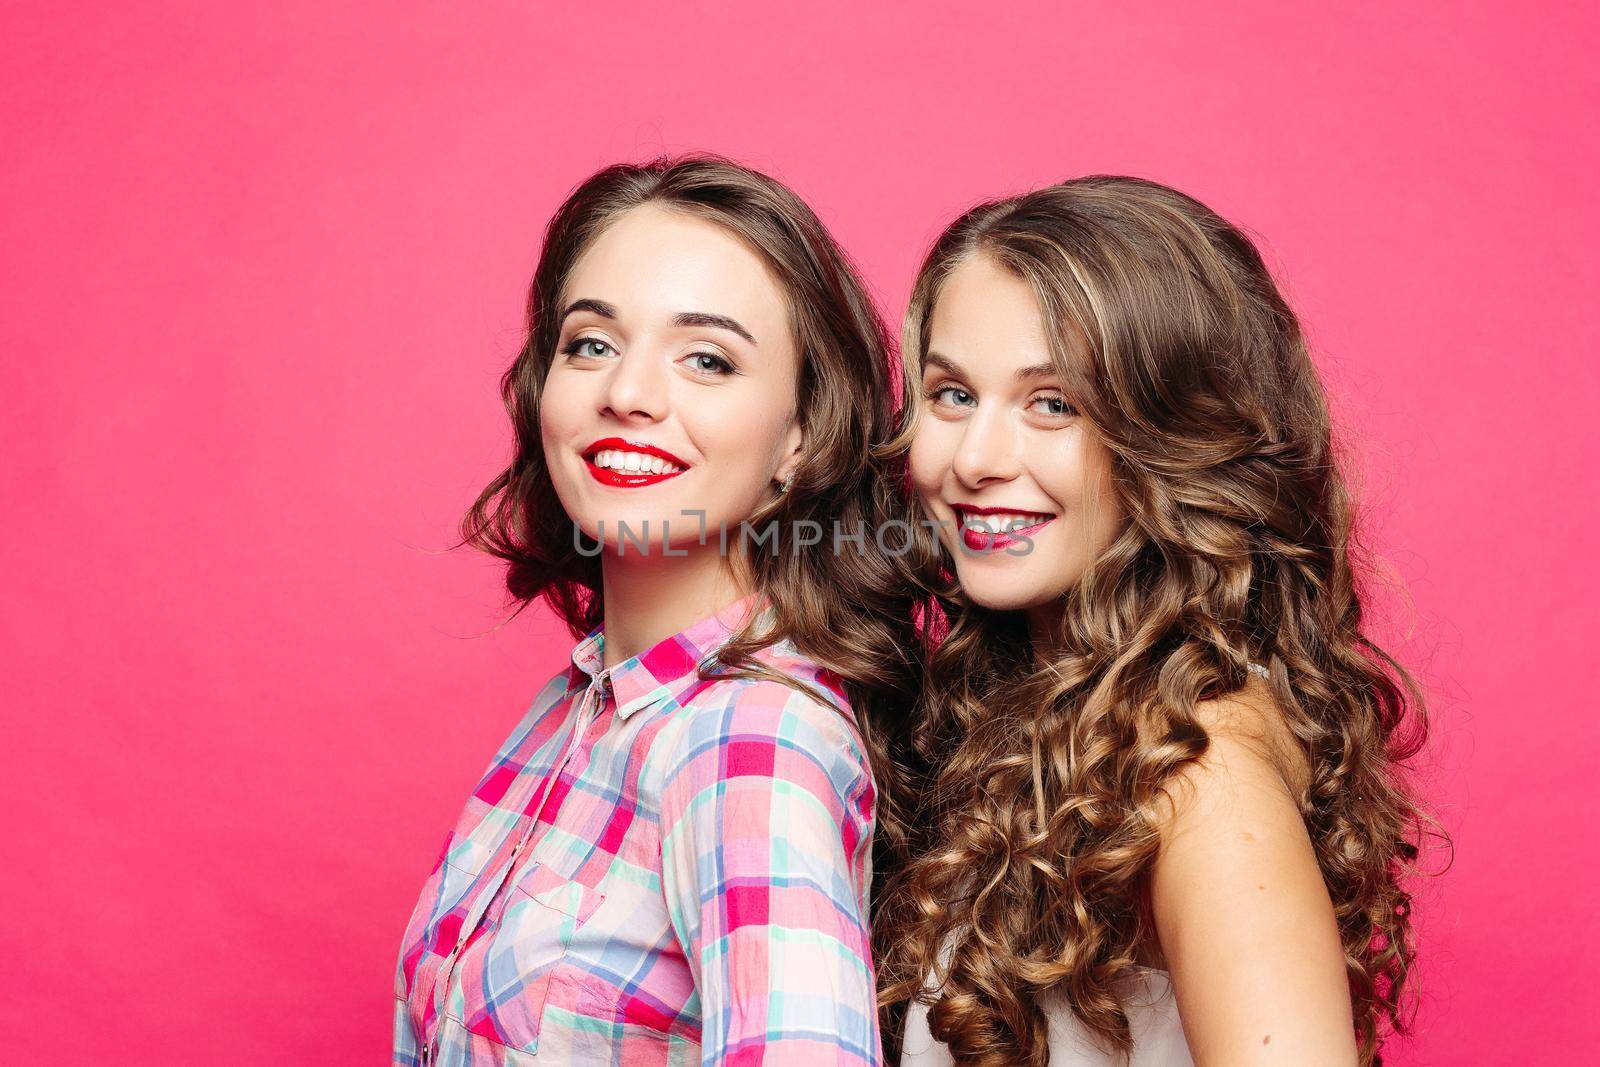 Studio view of beautiful girls with magnificent wavy hair and red lips, in a hipster style with a happy, cute, decomposing smile Isolate on a pink background by StudioLucky